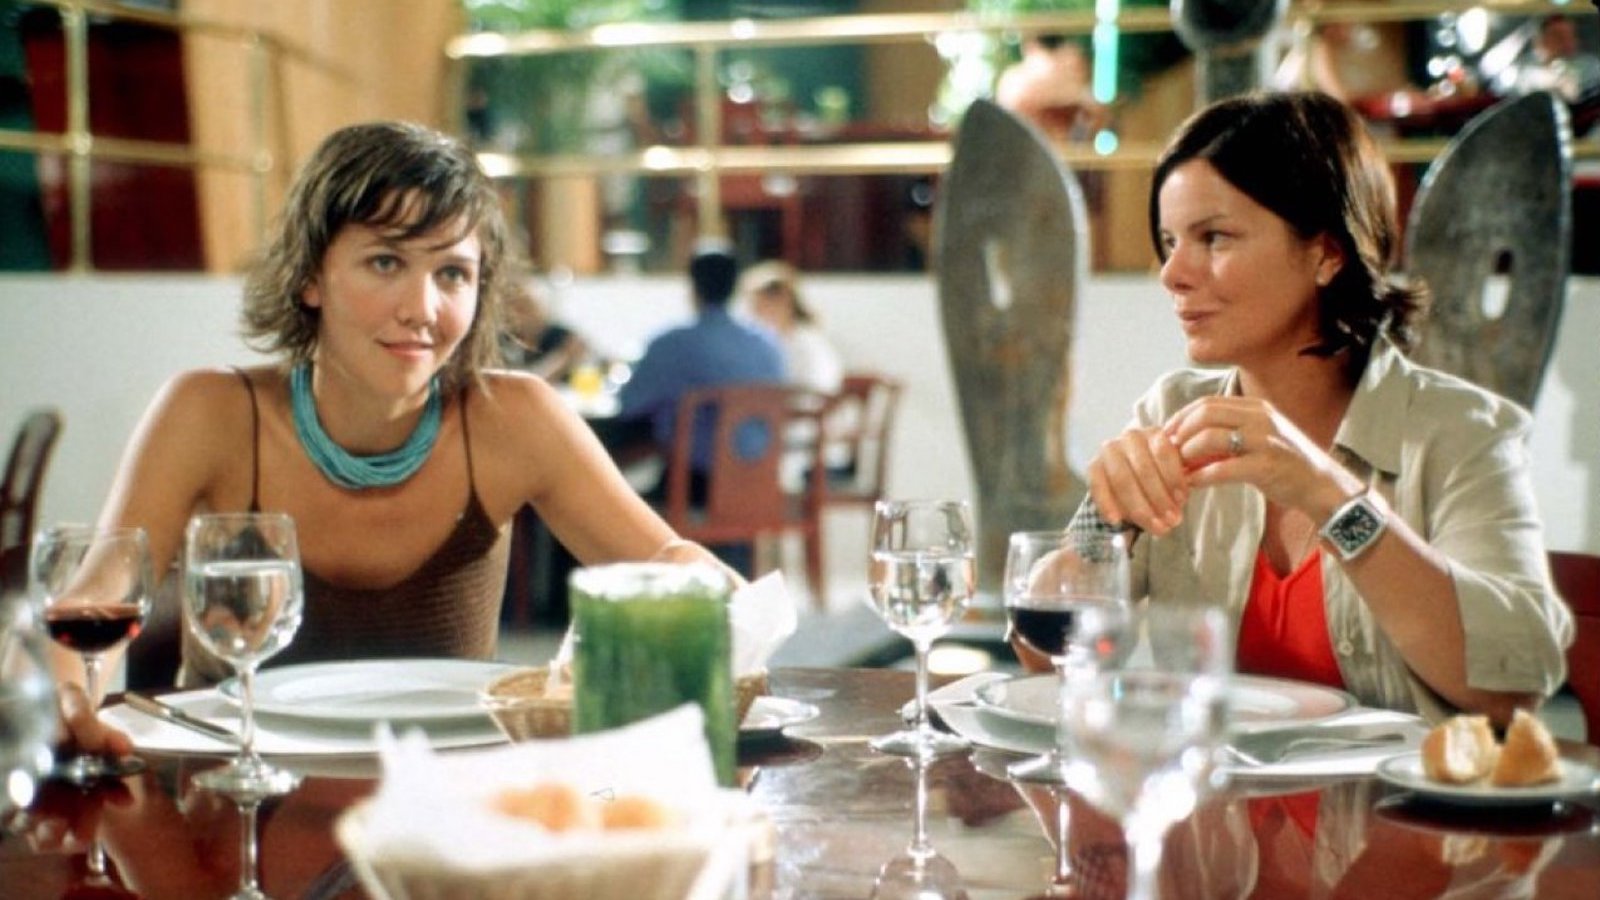 Two women sit at an outdoor table, eating and talking.